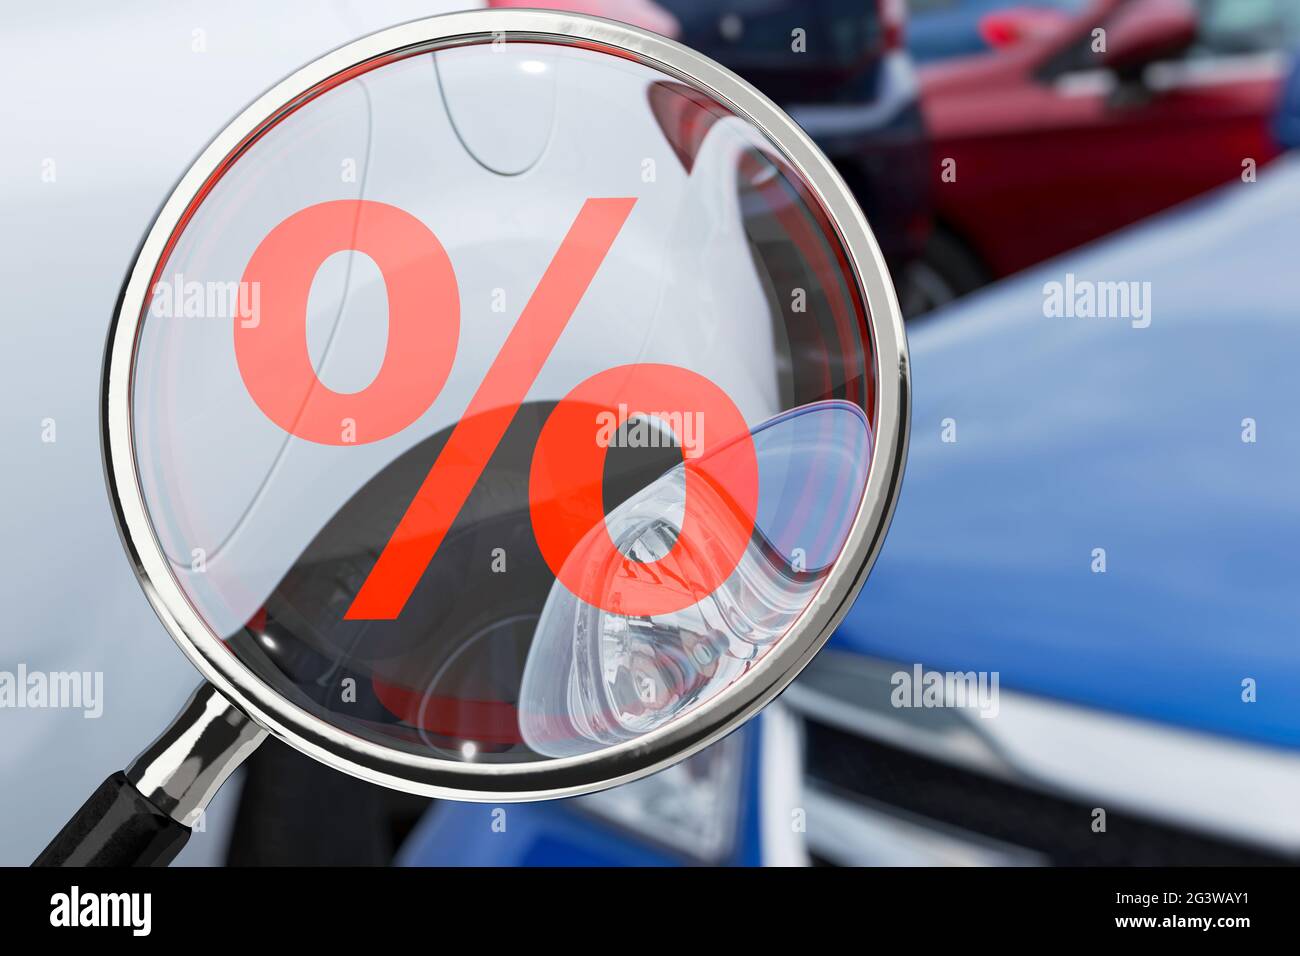 Car purchase discount Stock Photo